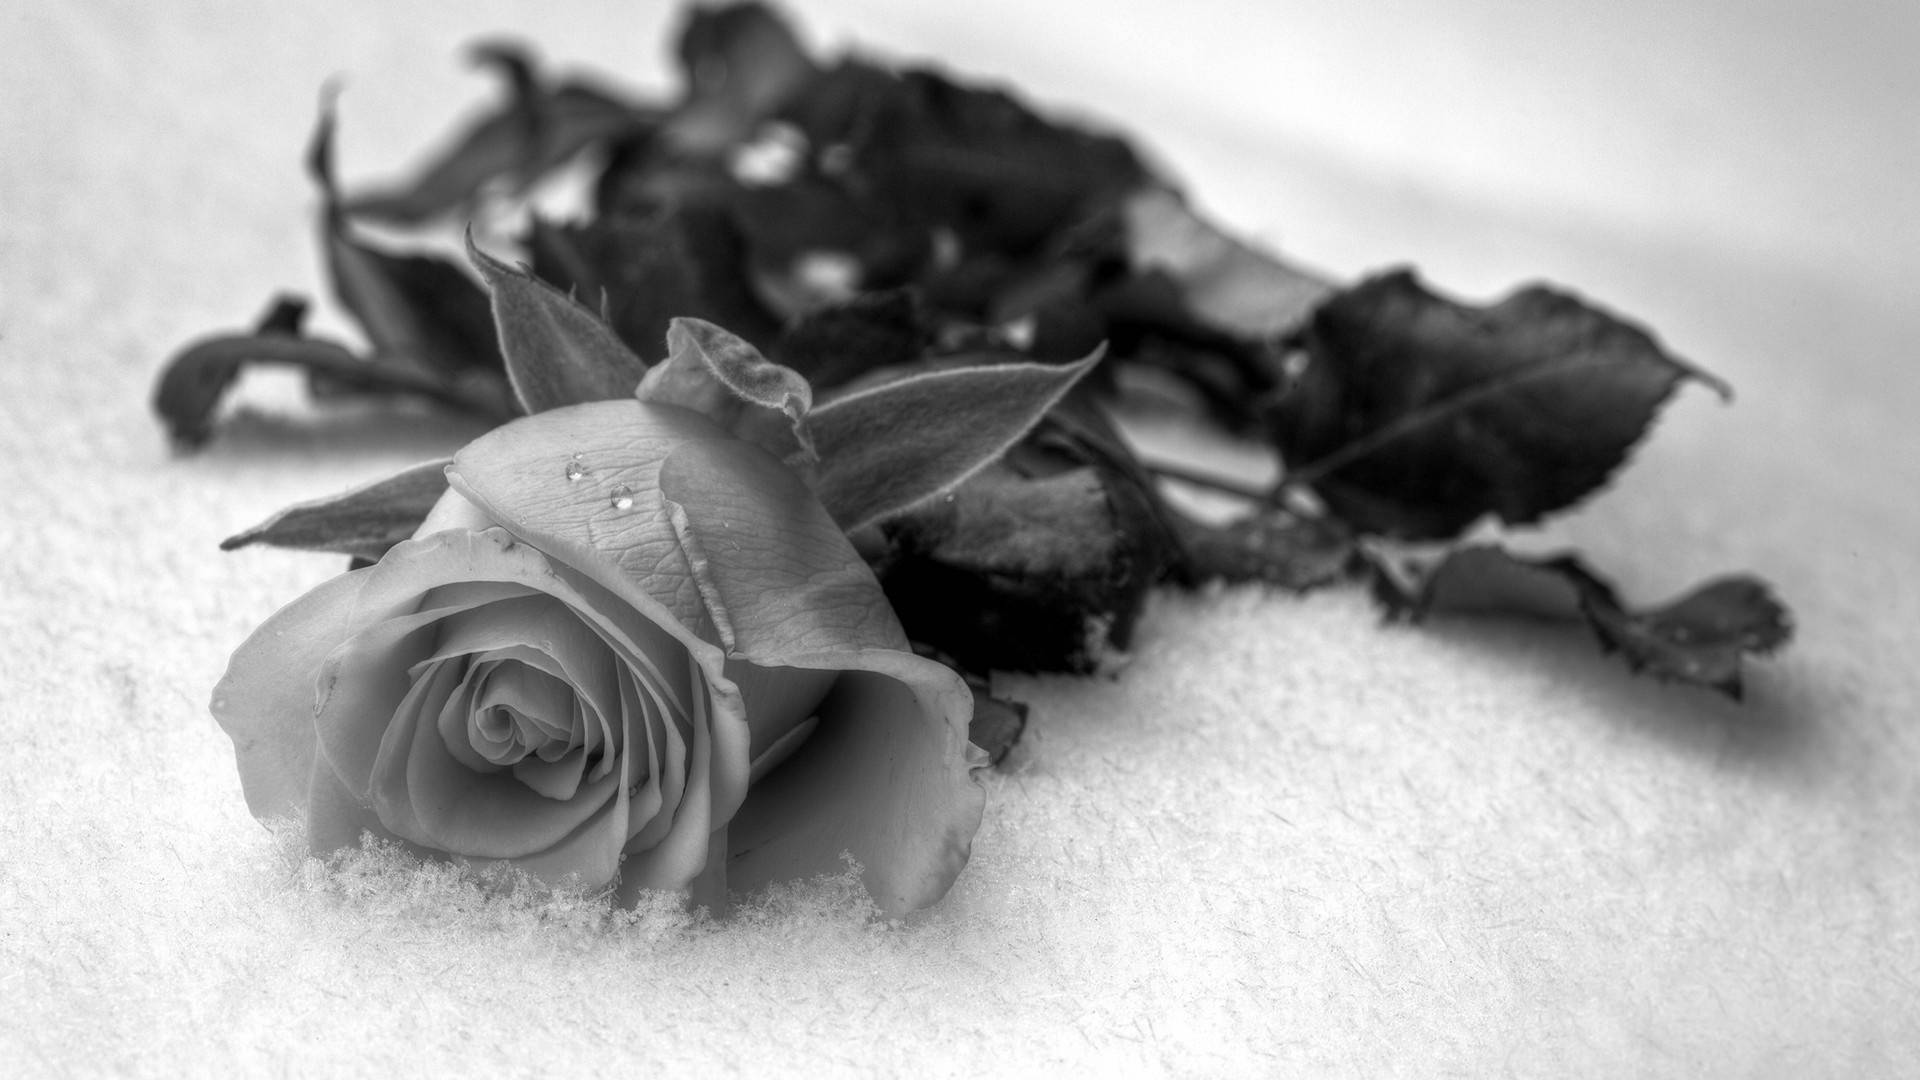 Black And White Rose On Fabric